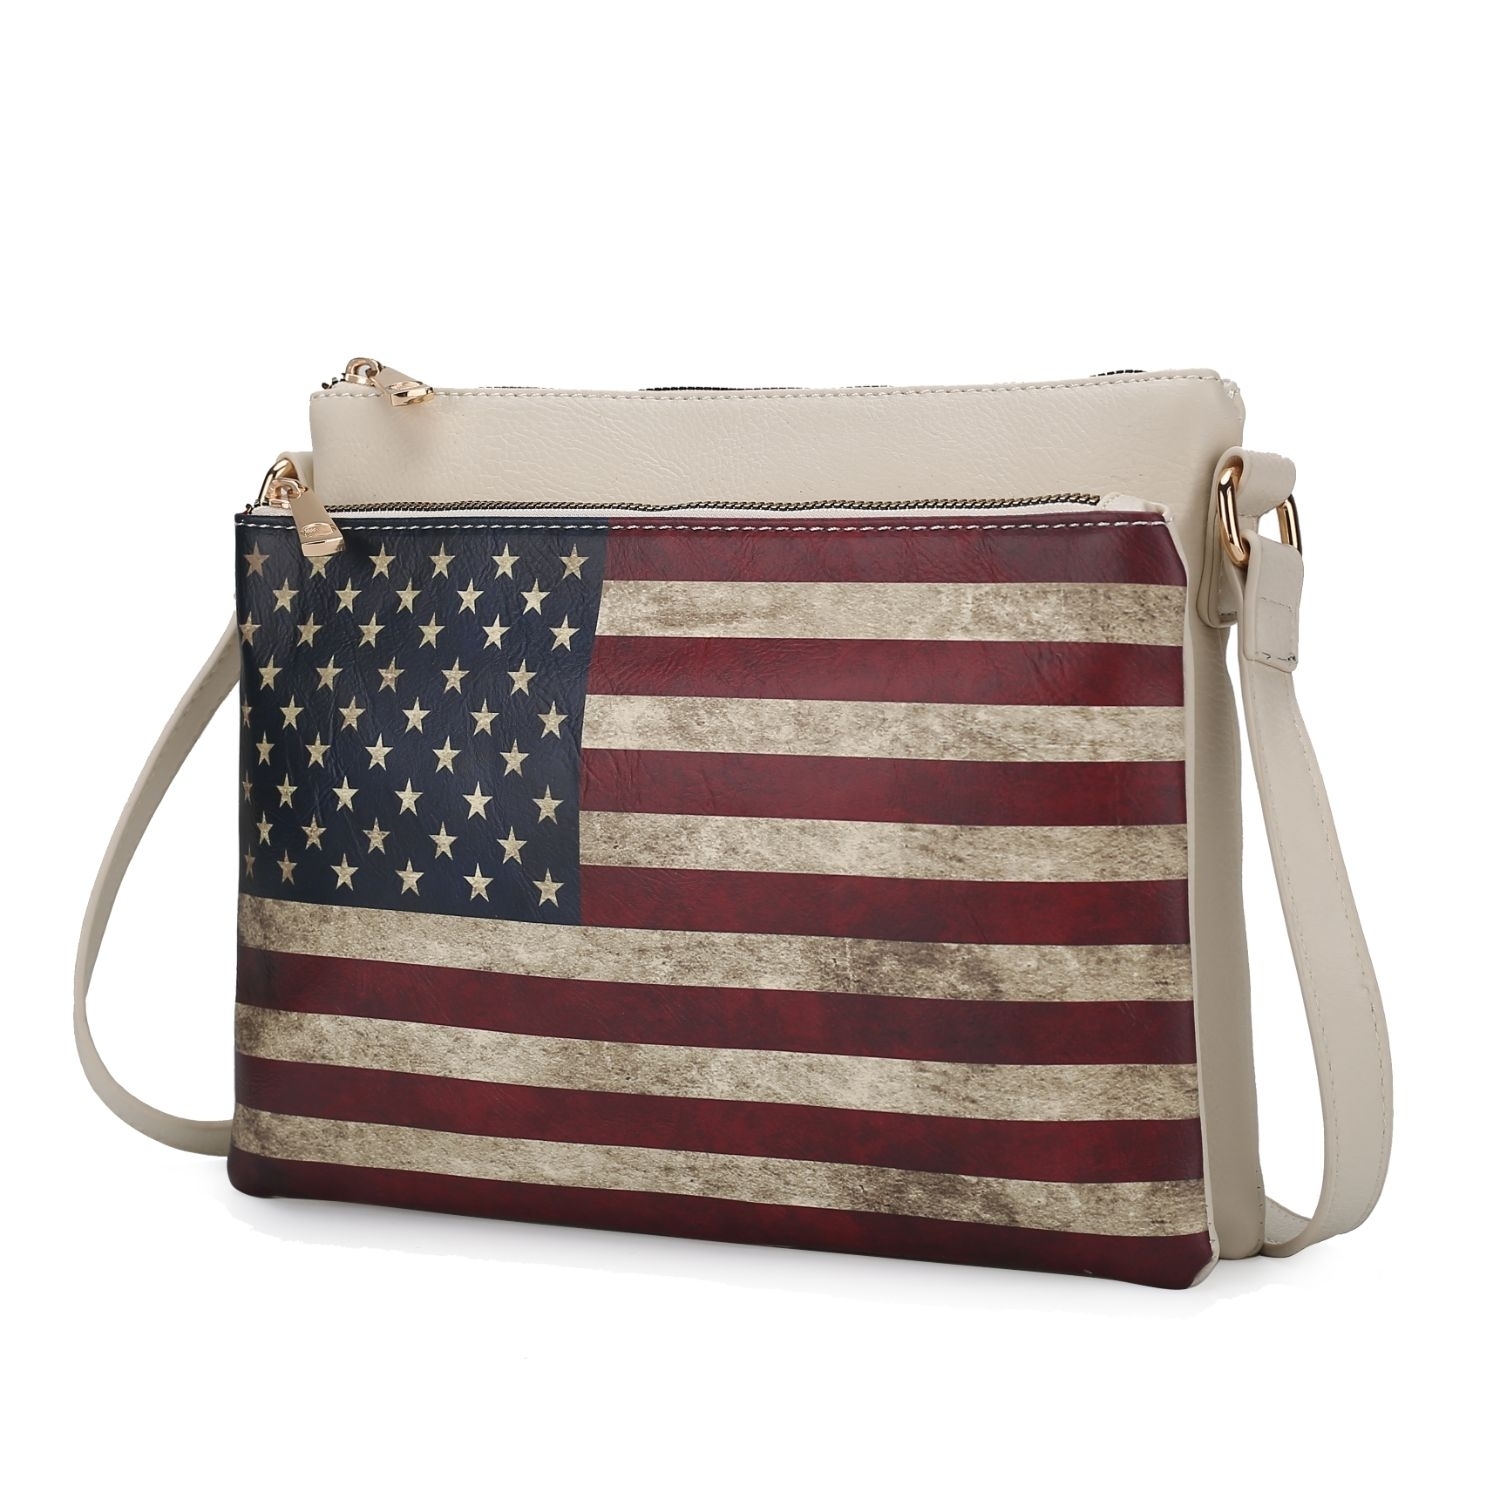 MKF Collection Madeline Printed Flag Vegan Leather Women's Crossbody Bag By Mia K - Chocolate